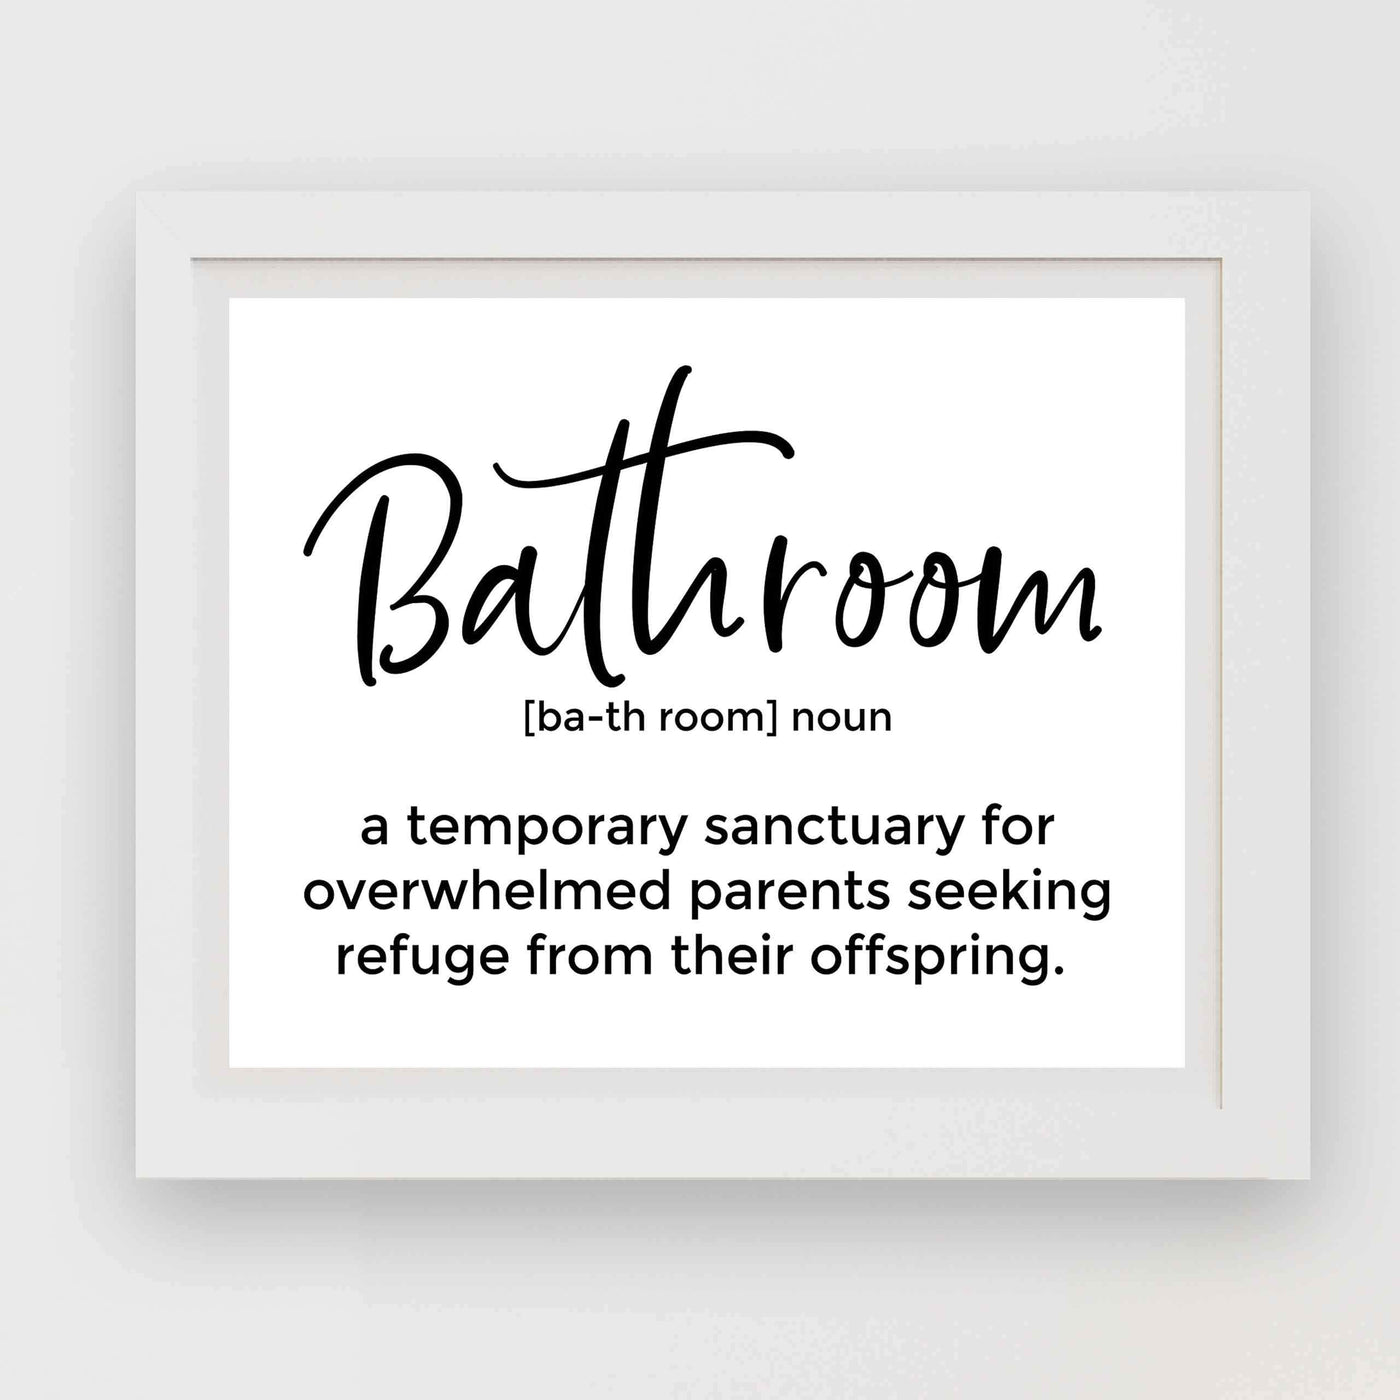 Bathroom-Sanctuary for Overwhelmed Parents- Funny Bathroom Sign -10 x 8" Typographic Wall Art Print-Ready to Frame. Humorous Decor for Home-Family-Guest Bathroom! Great Housewarming Gift!